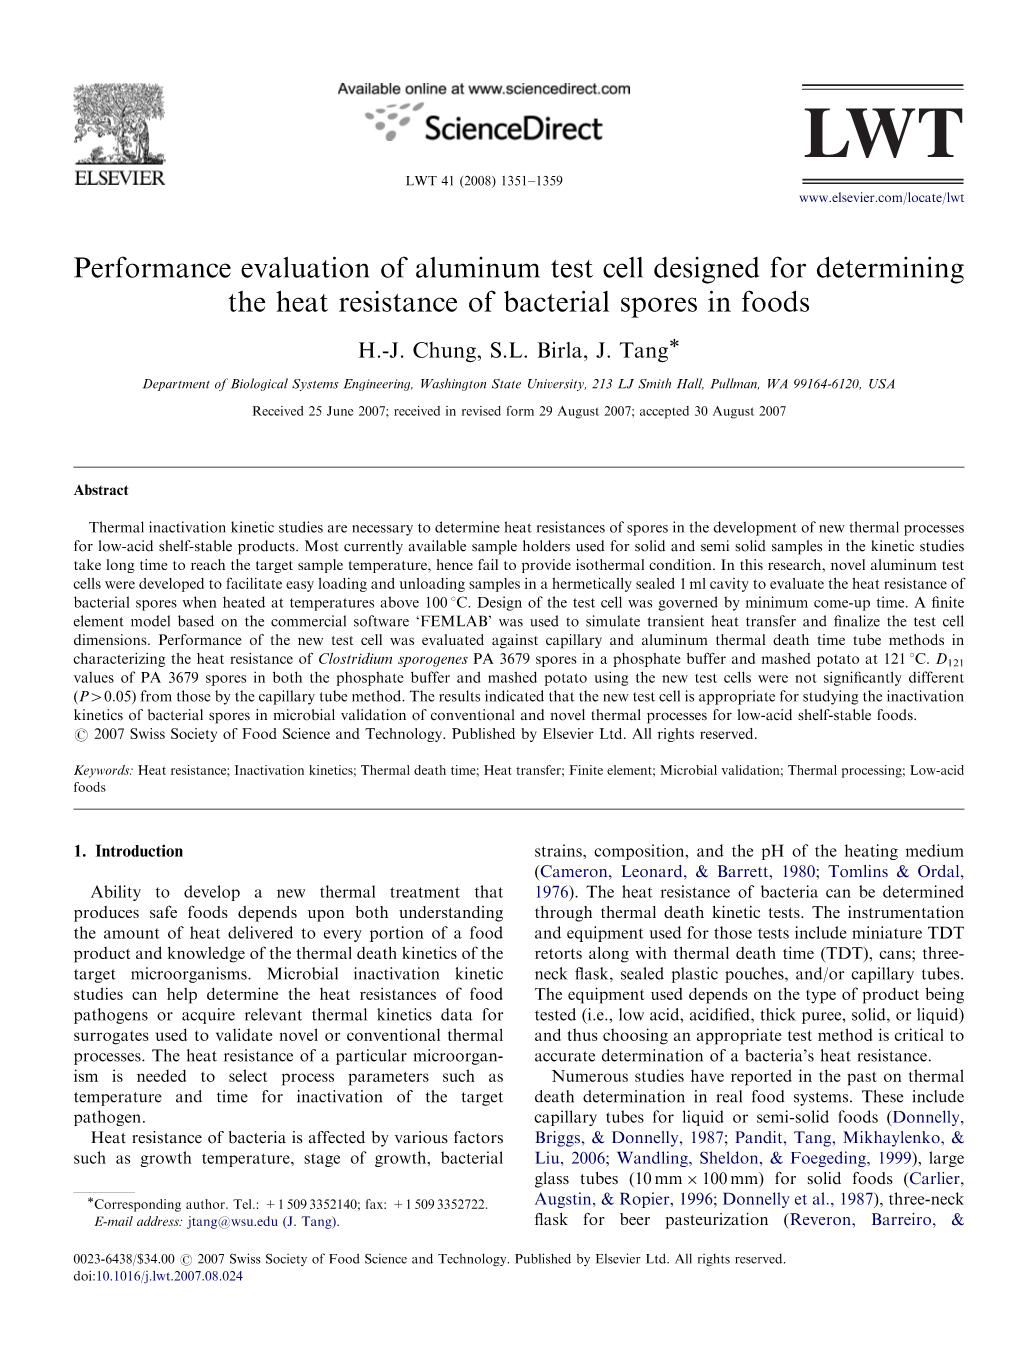 Performance Evaluation of Aluminum Test Cell Designed for Determining the Heat Resistance of Bacterial Spores in Foods